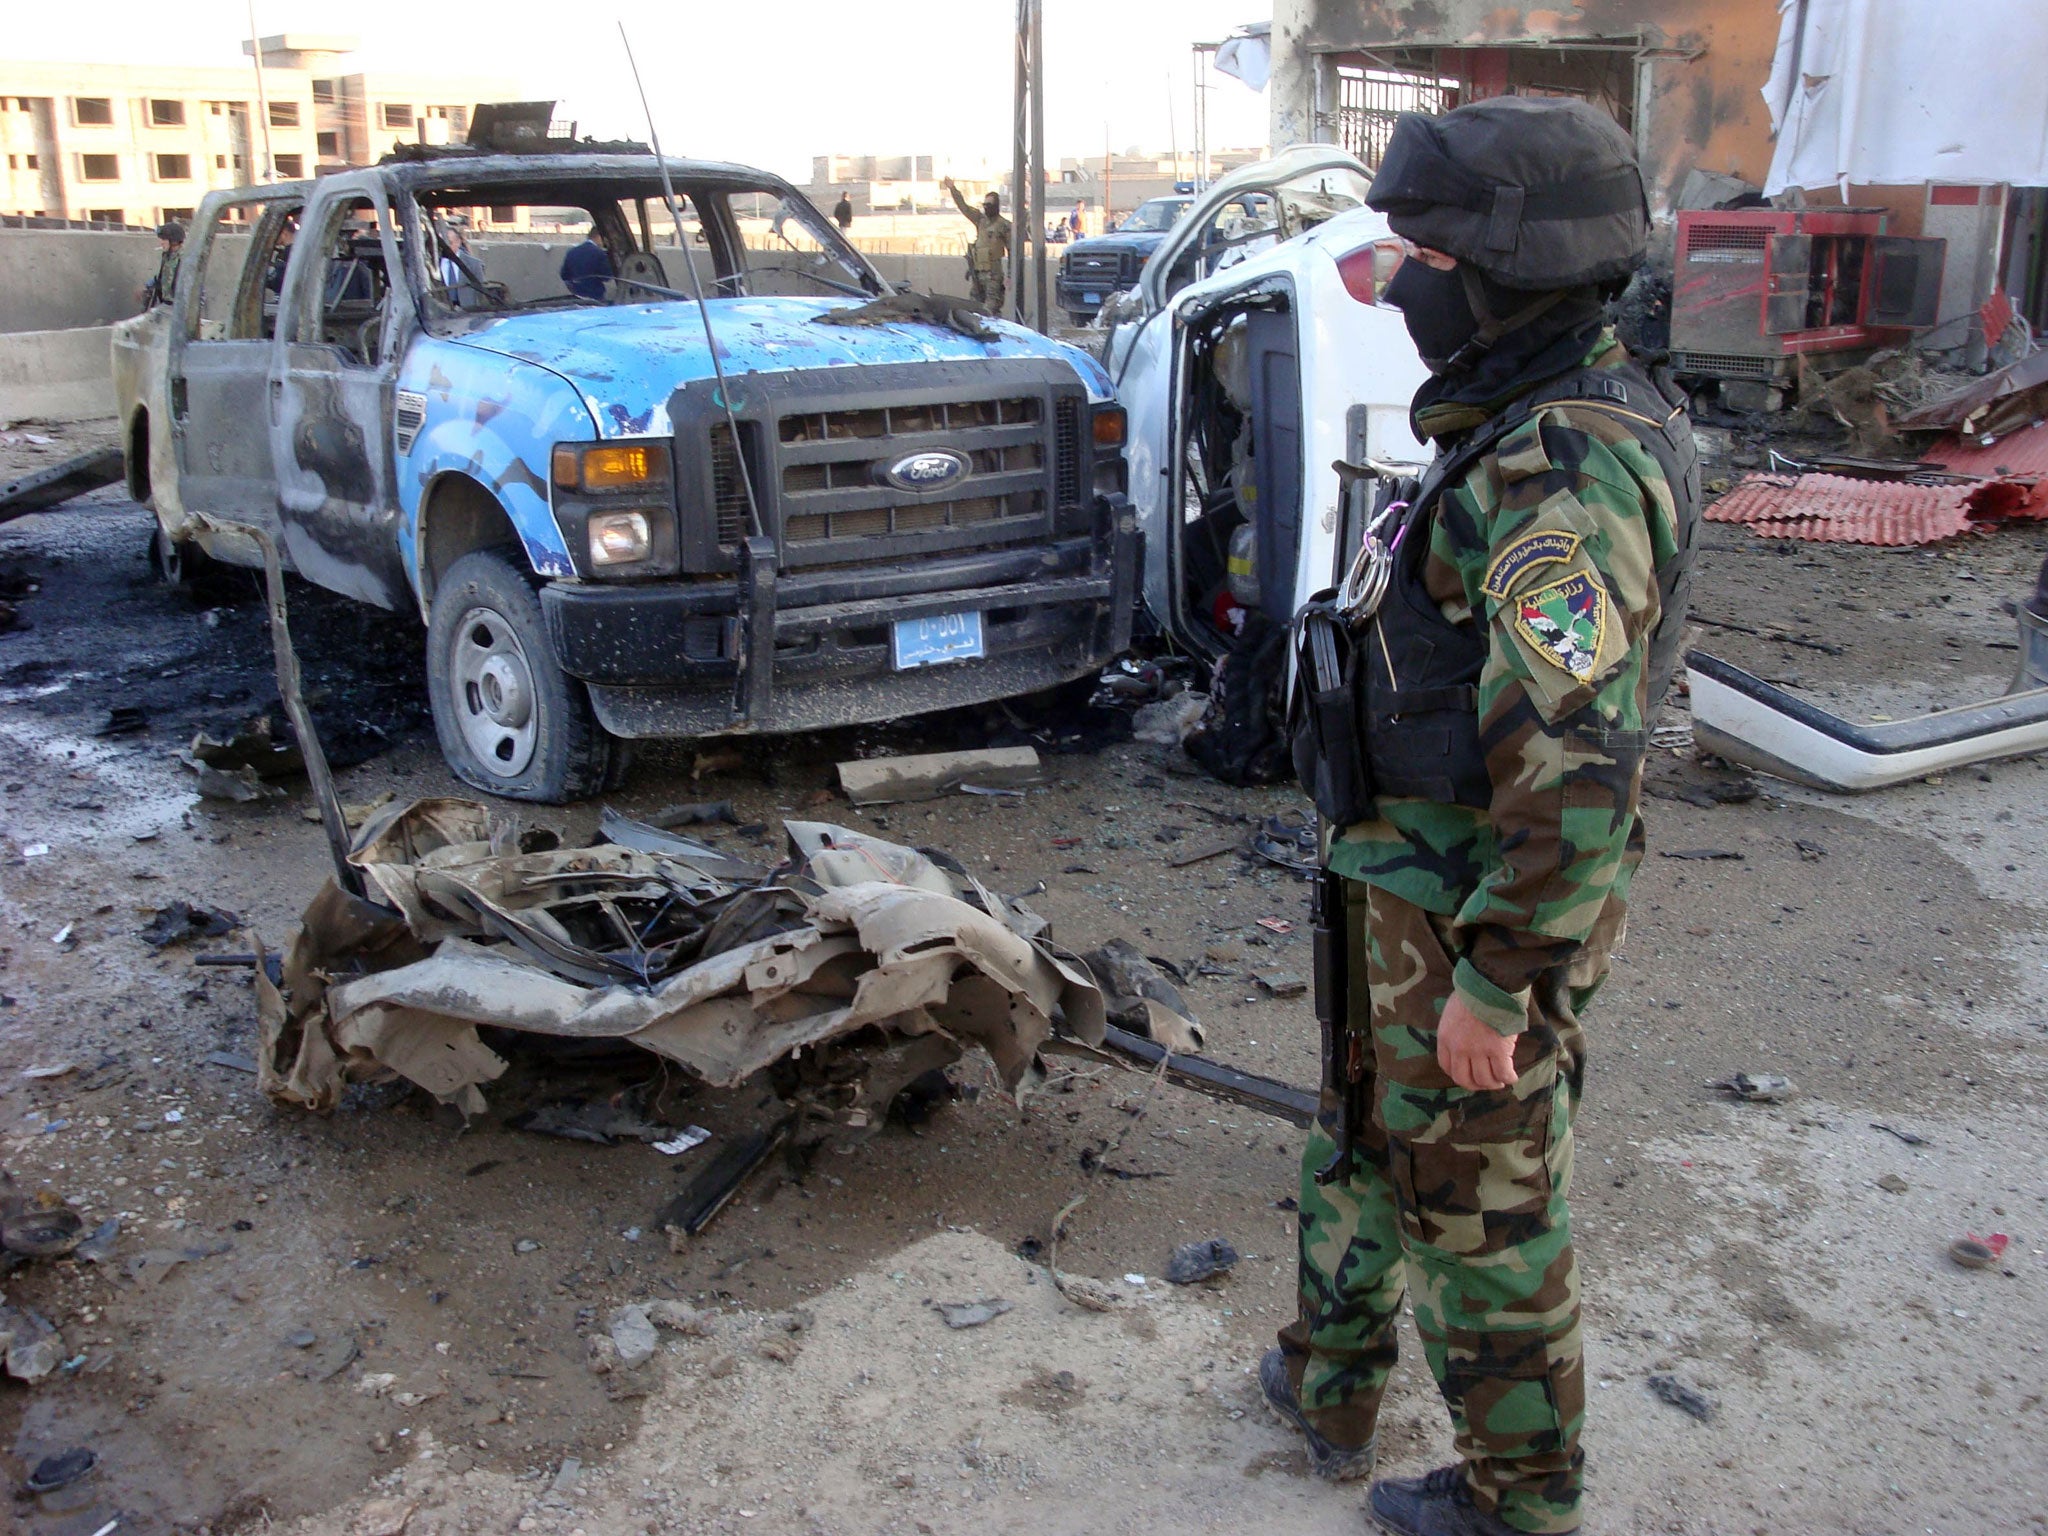 An Iraqi security office stands close to the debris following a car bomb, in the northern city of Kirkuk on March 5, 2013.